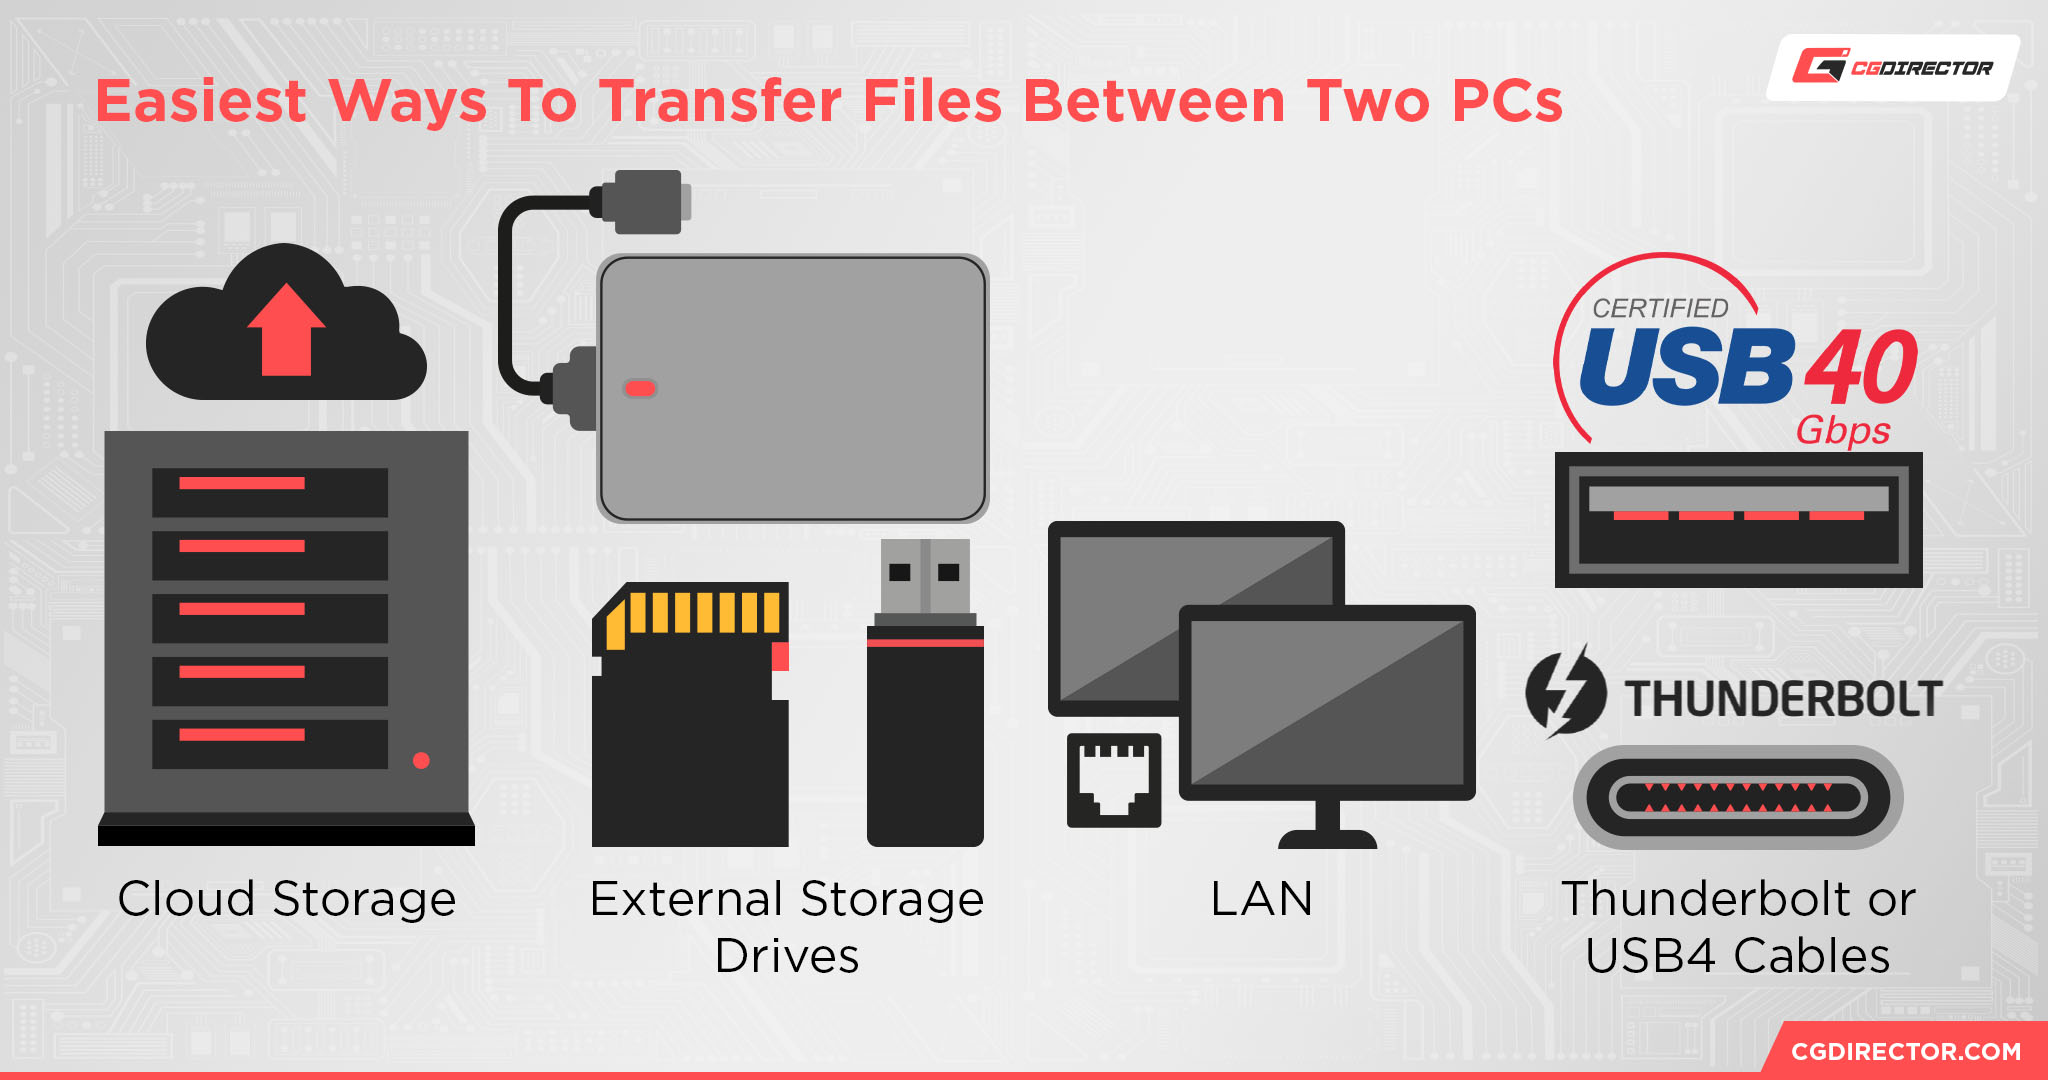 Easiest Ways To Transfer Files Between Two PCs